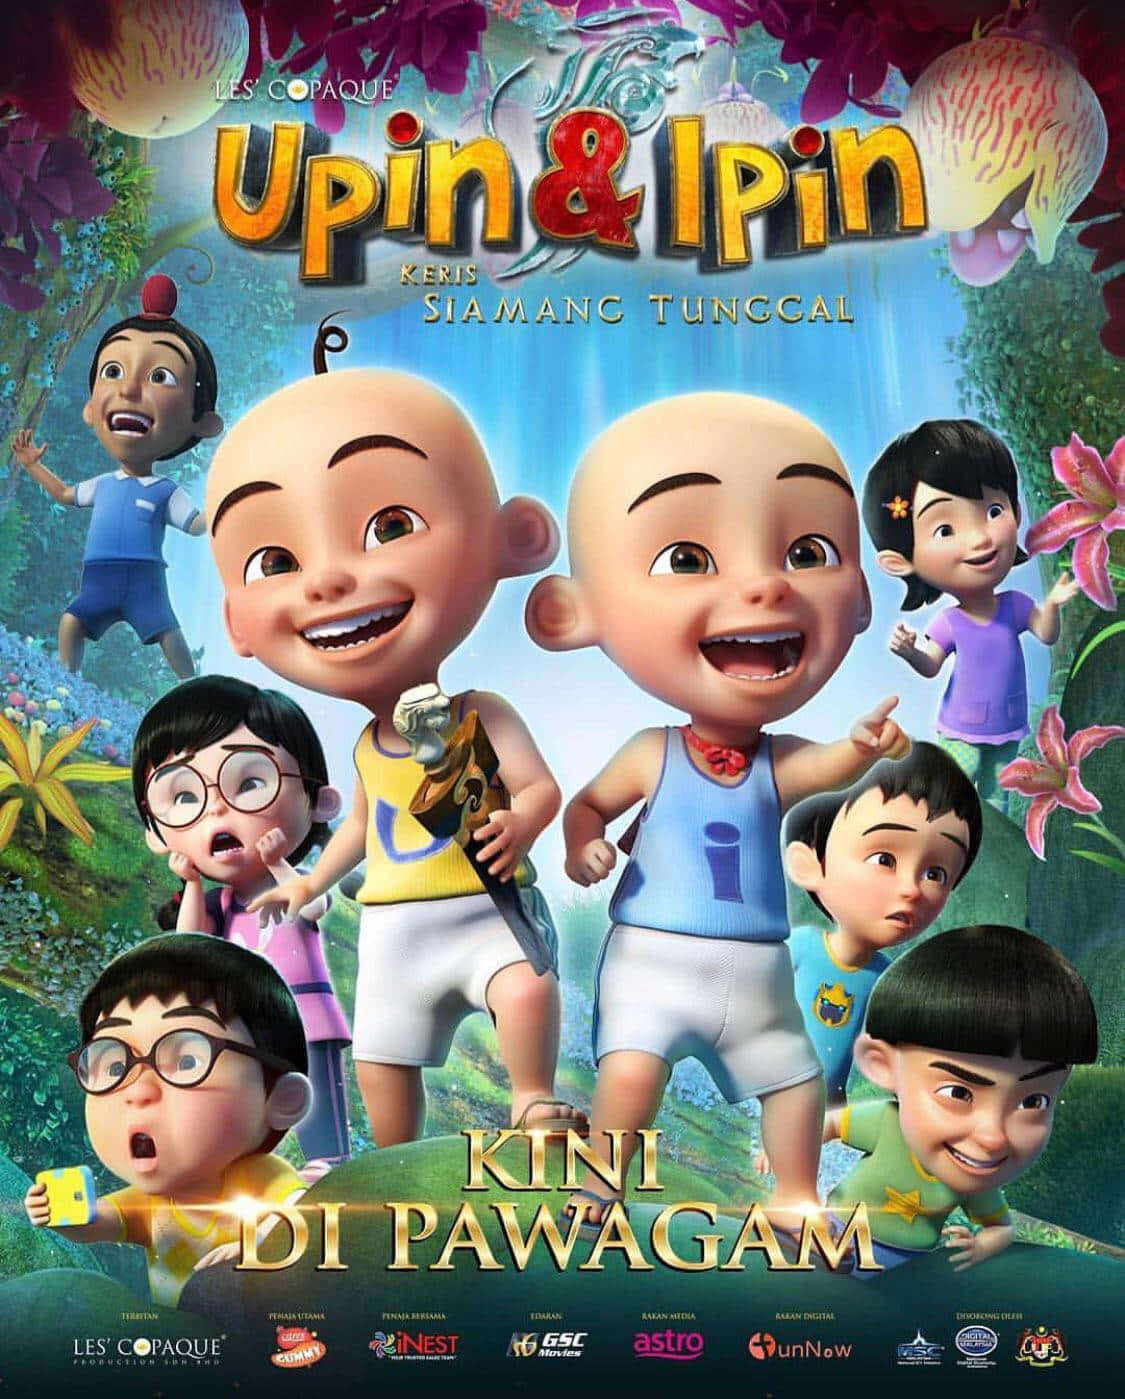 "Every Day Is Fun Exploring With Upin&Ipin!"